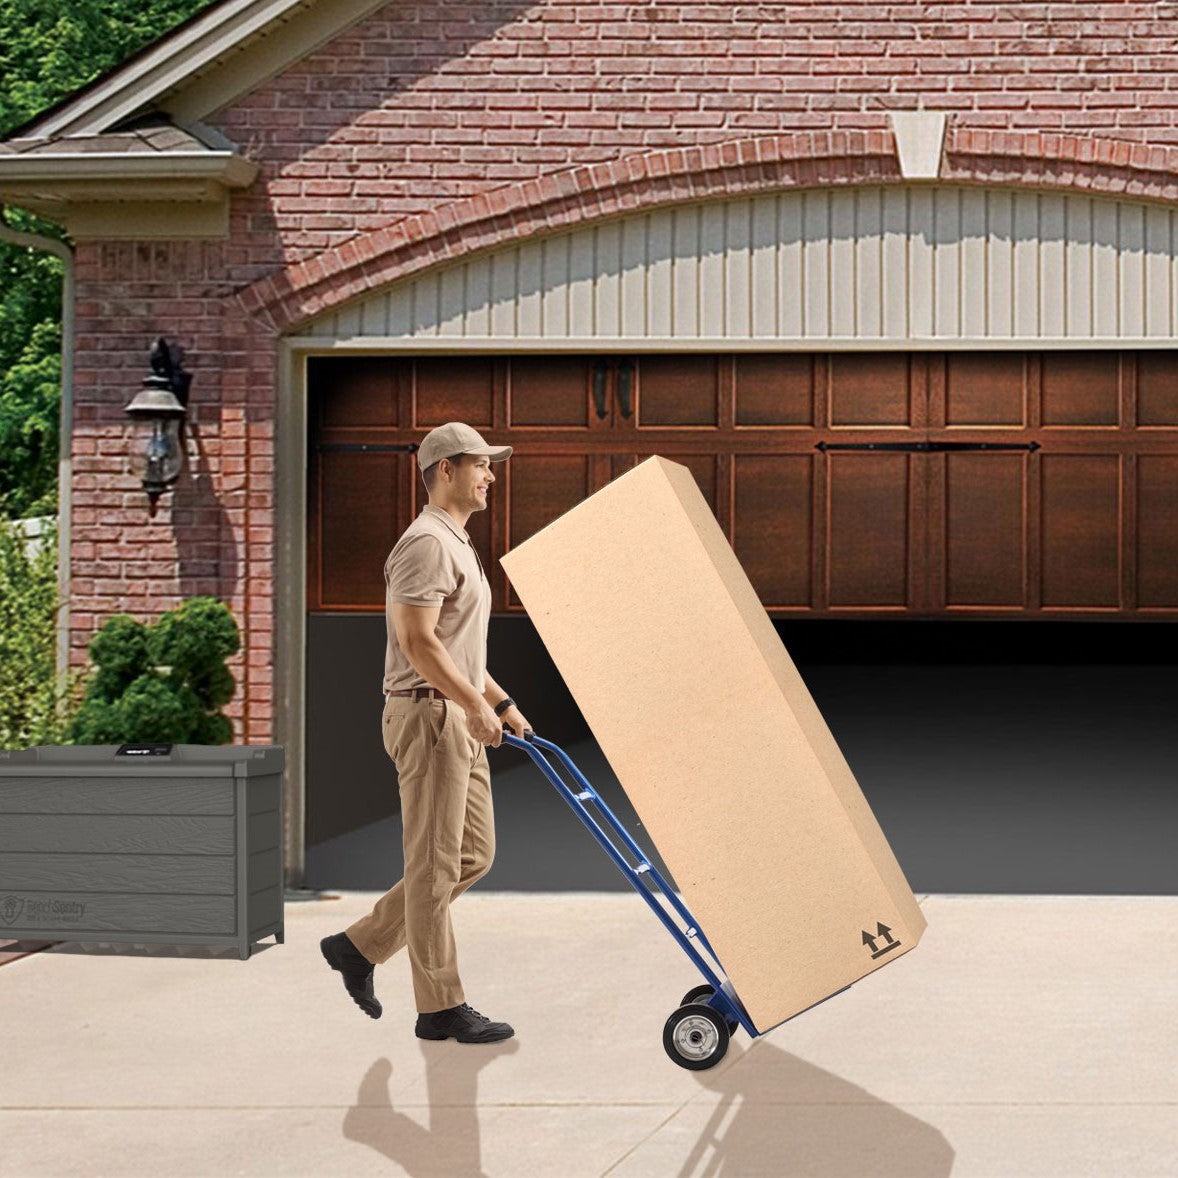 Delivery person with a large package on a dolly, delivering into a garage